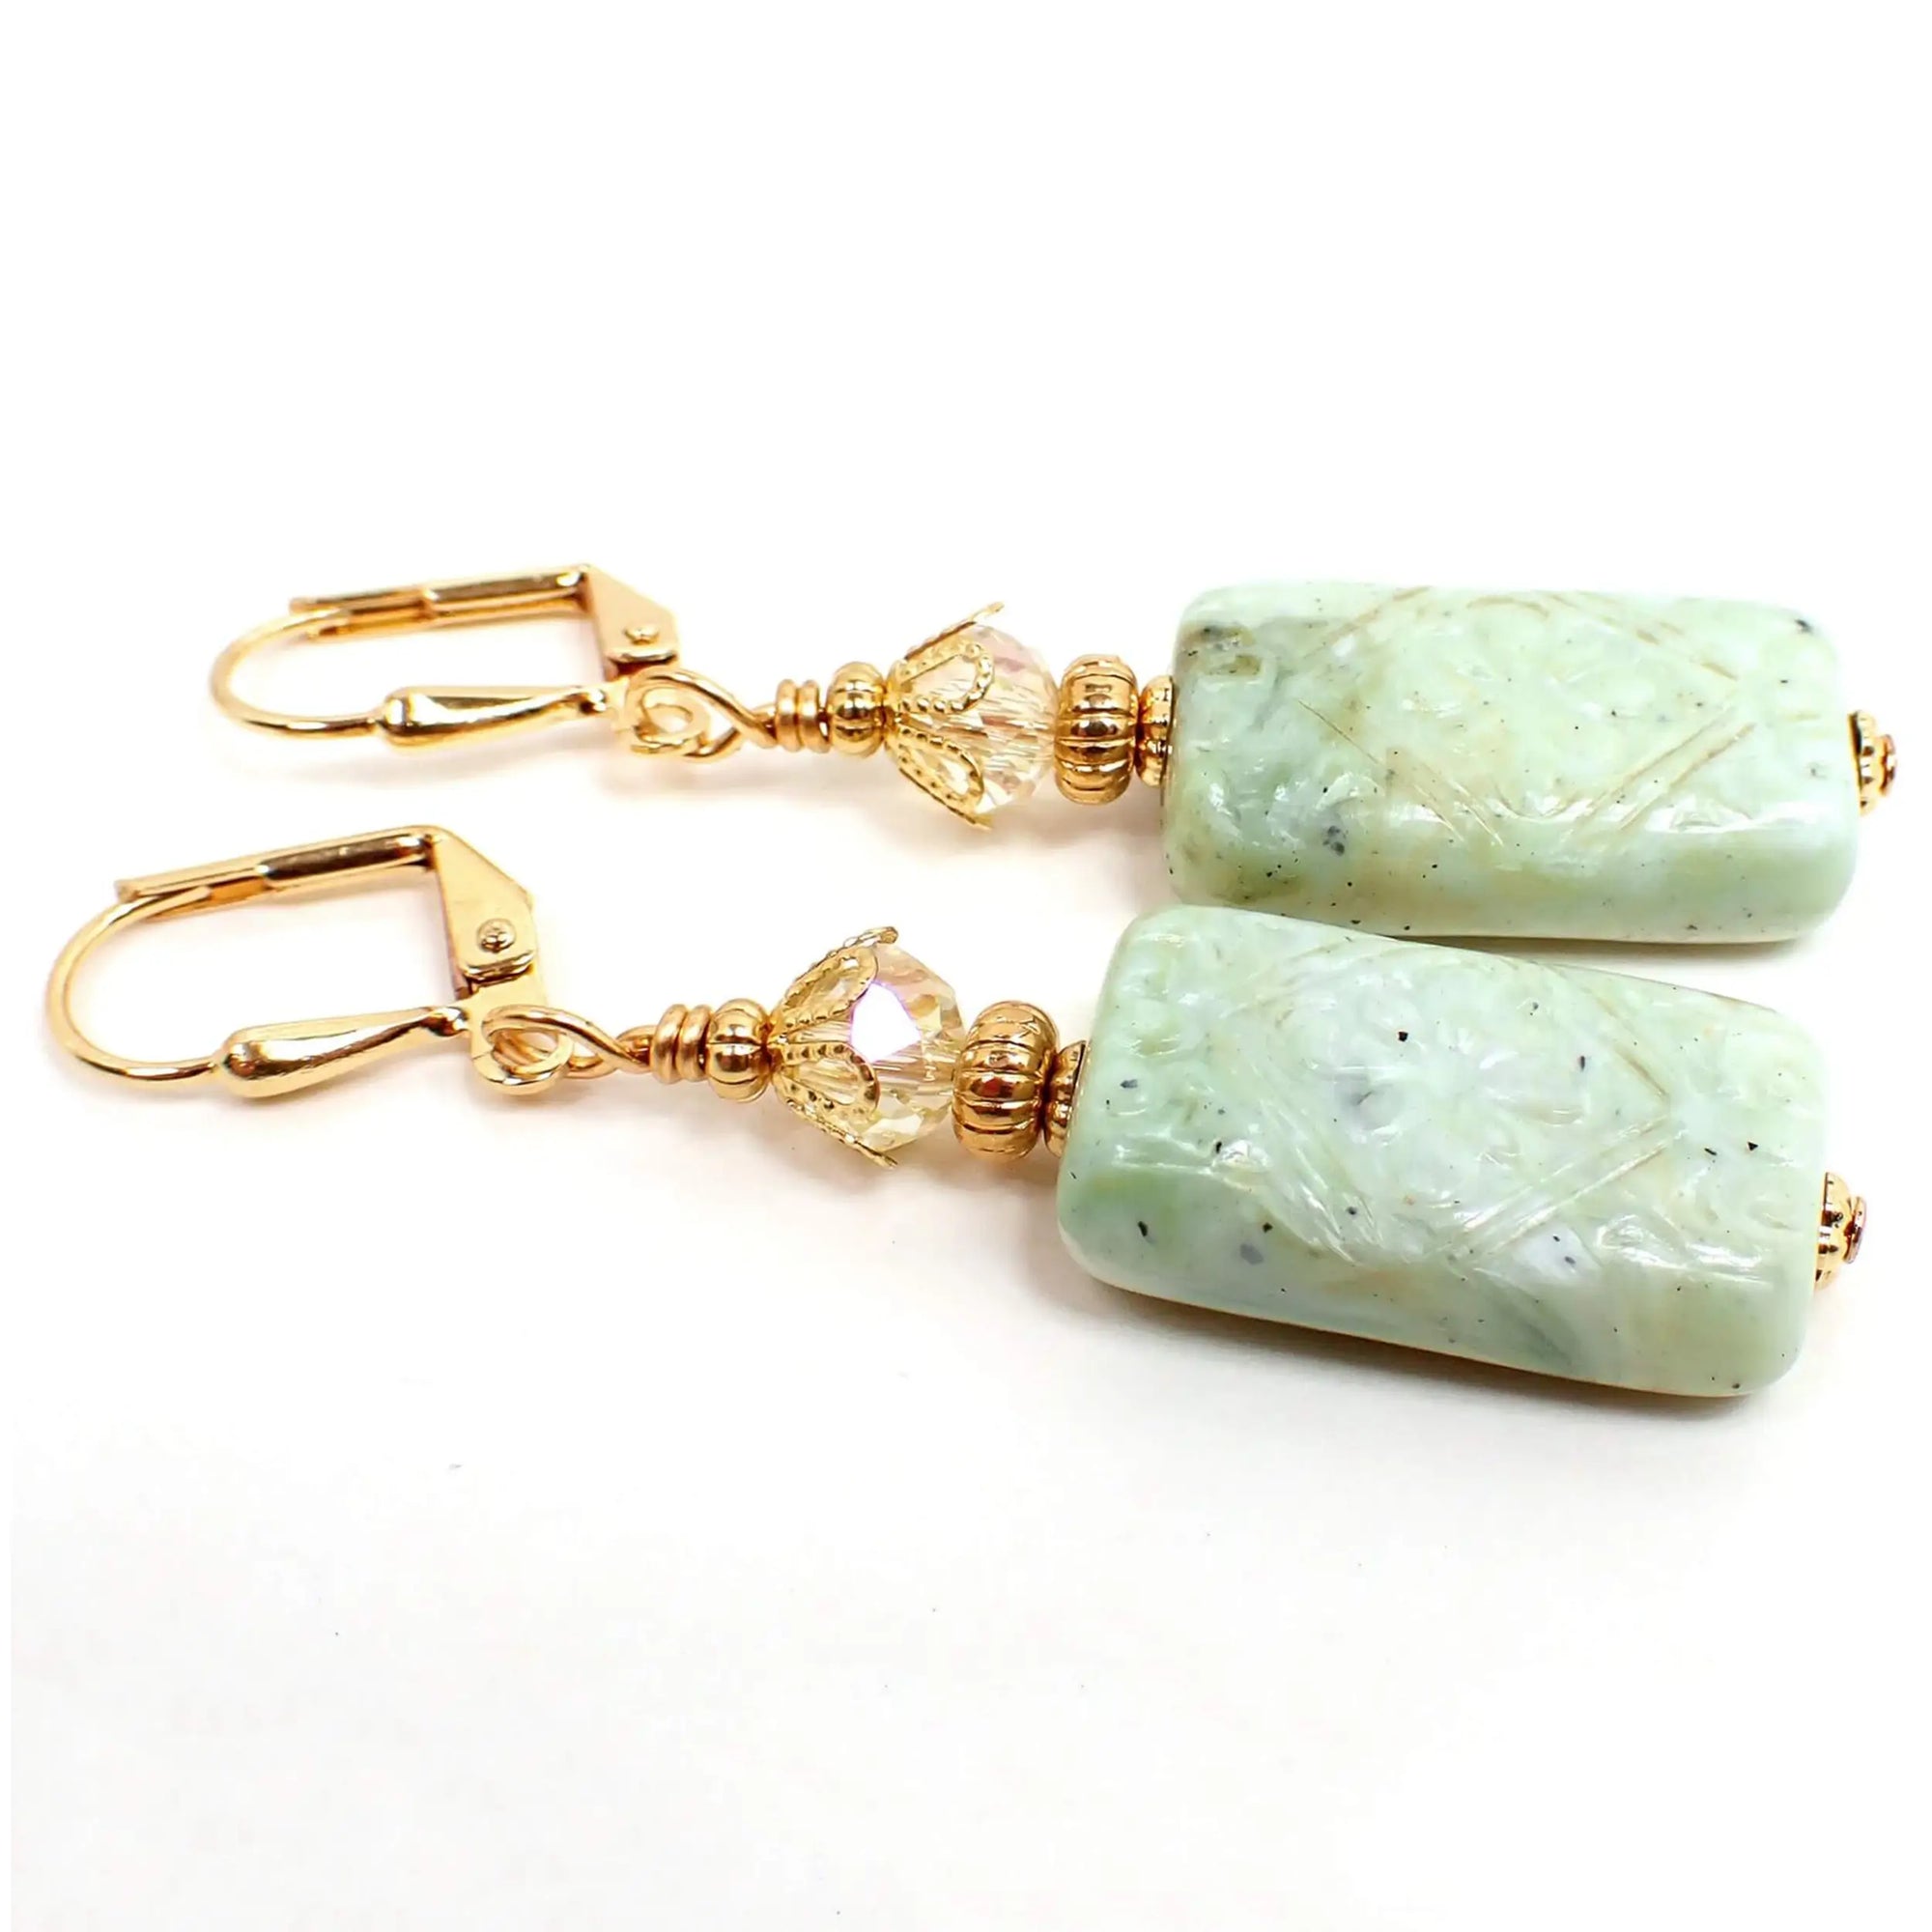 Angled view of the handmade rectangle drop earrings. The metal is gold plated in color. There are light yellow faceted glass crystal beads at the top. The bottom rectangle beads are acrylic with a textured floral pattern and mottled shades of light green.